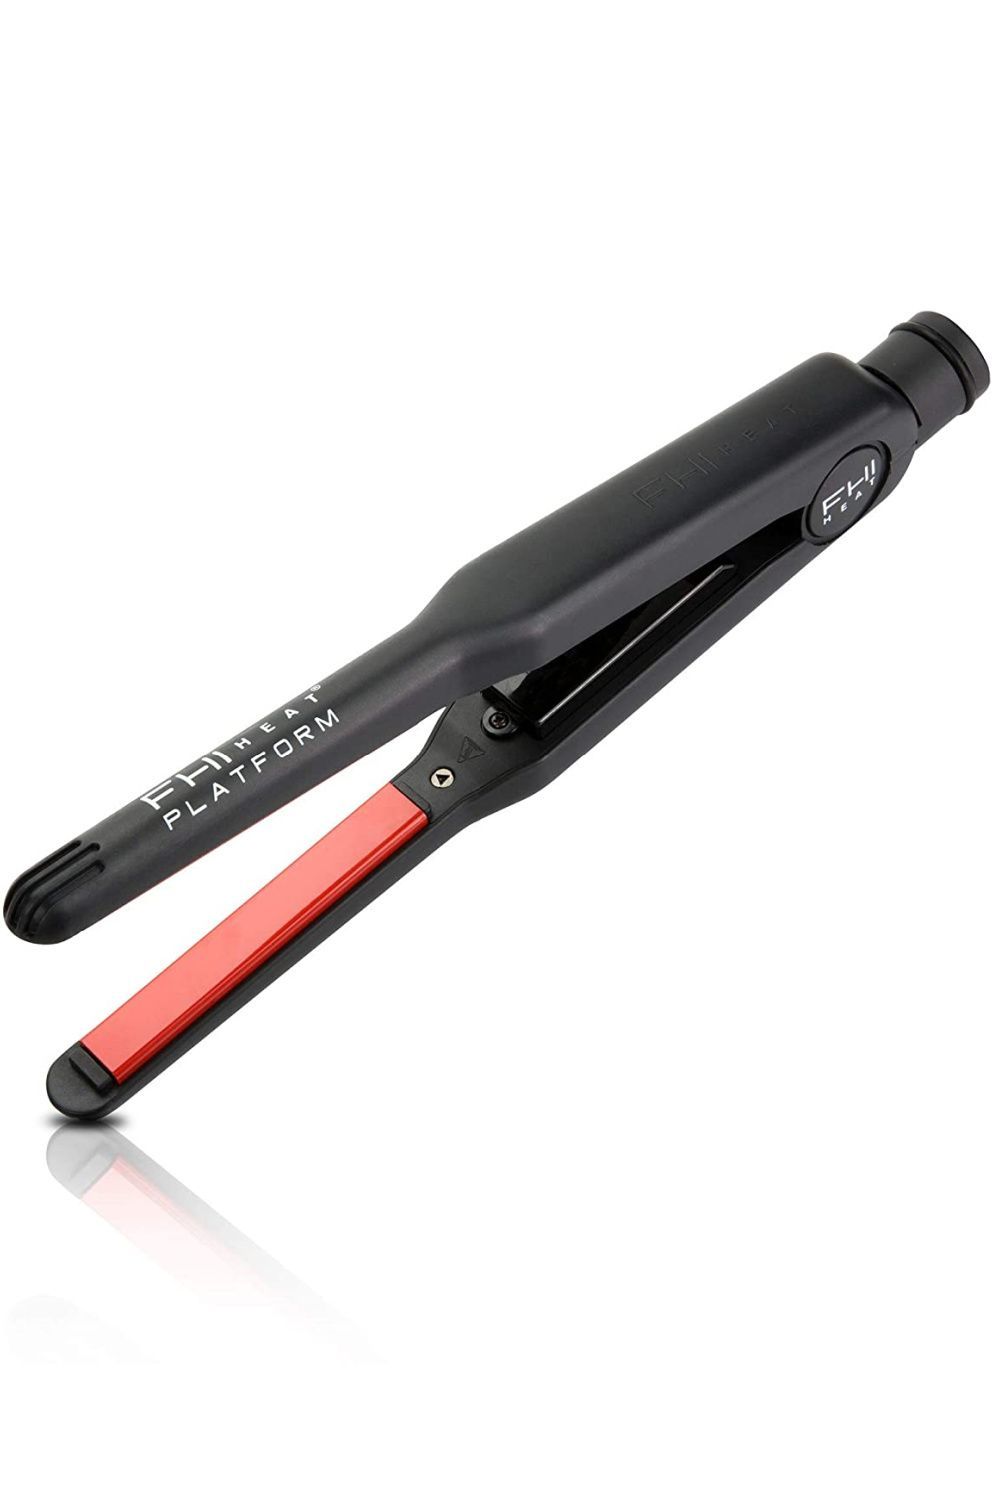 13 Best Straighteners and Flat Irons for Natural Hair in 2022